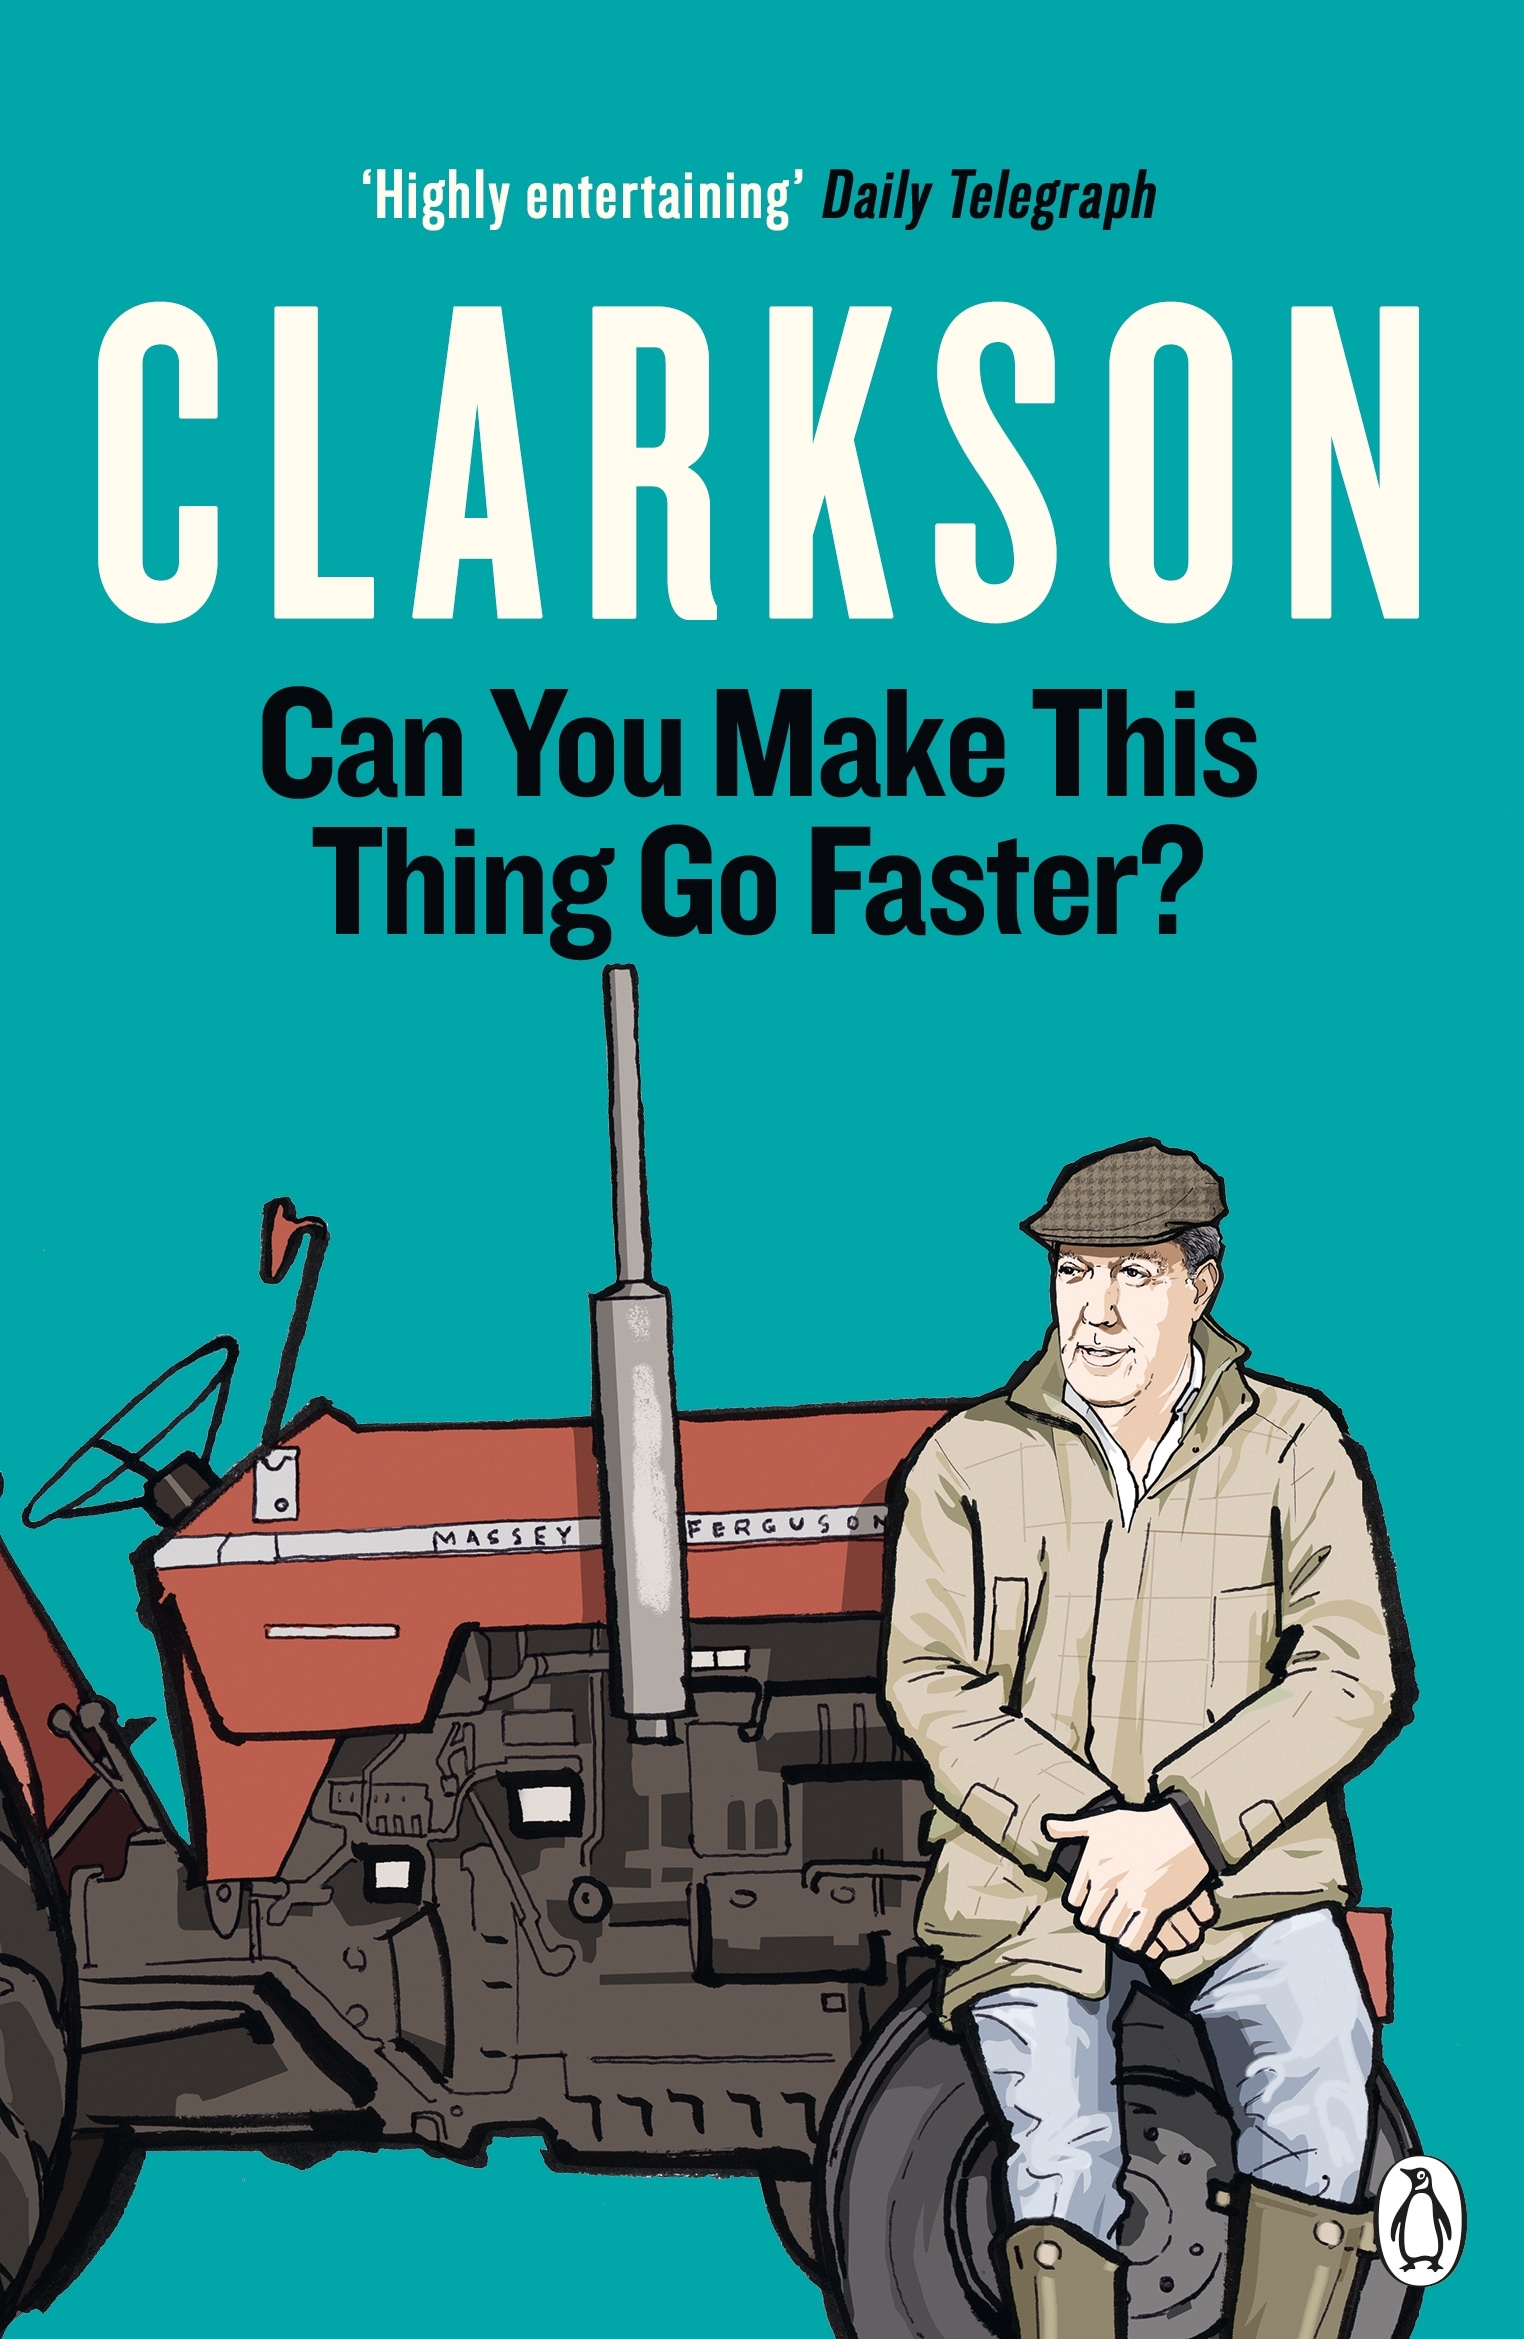 Book “Can You Make This Thing Go Faster?” by Jeremy Clarkson